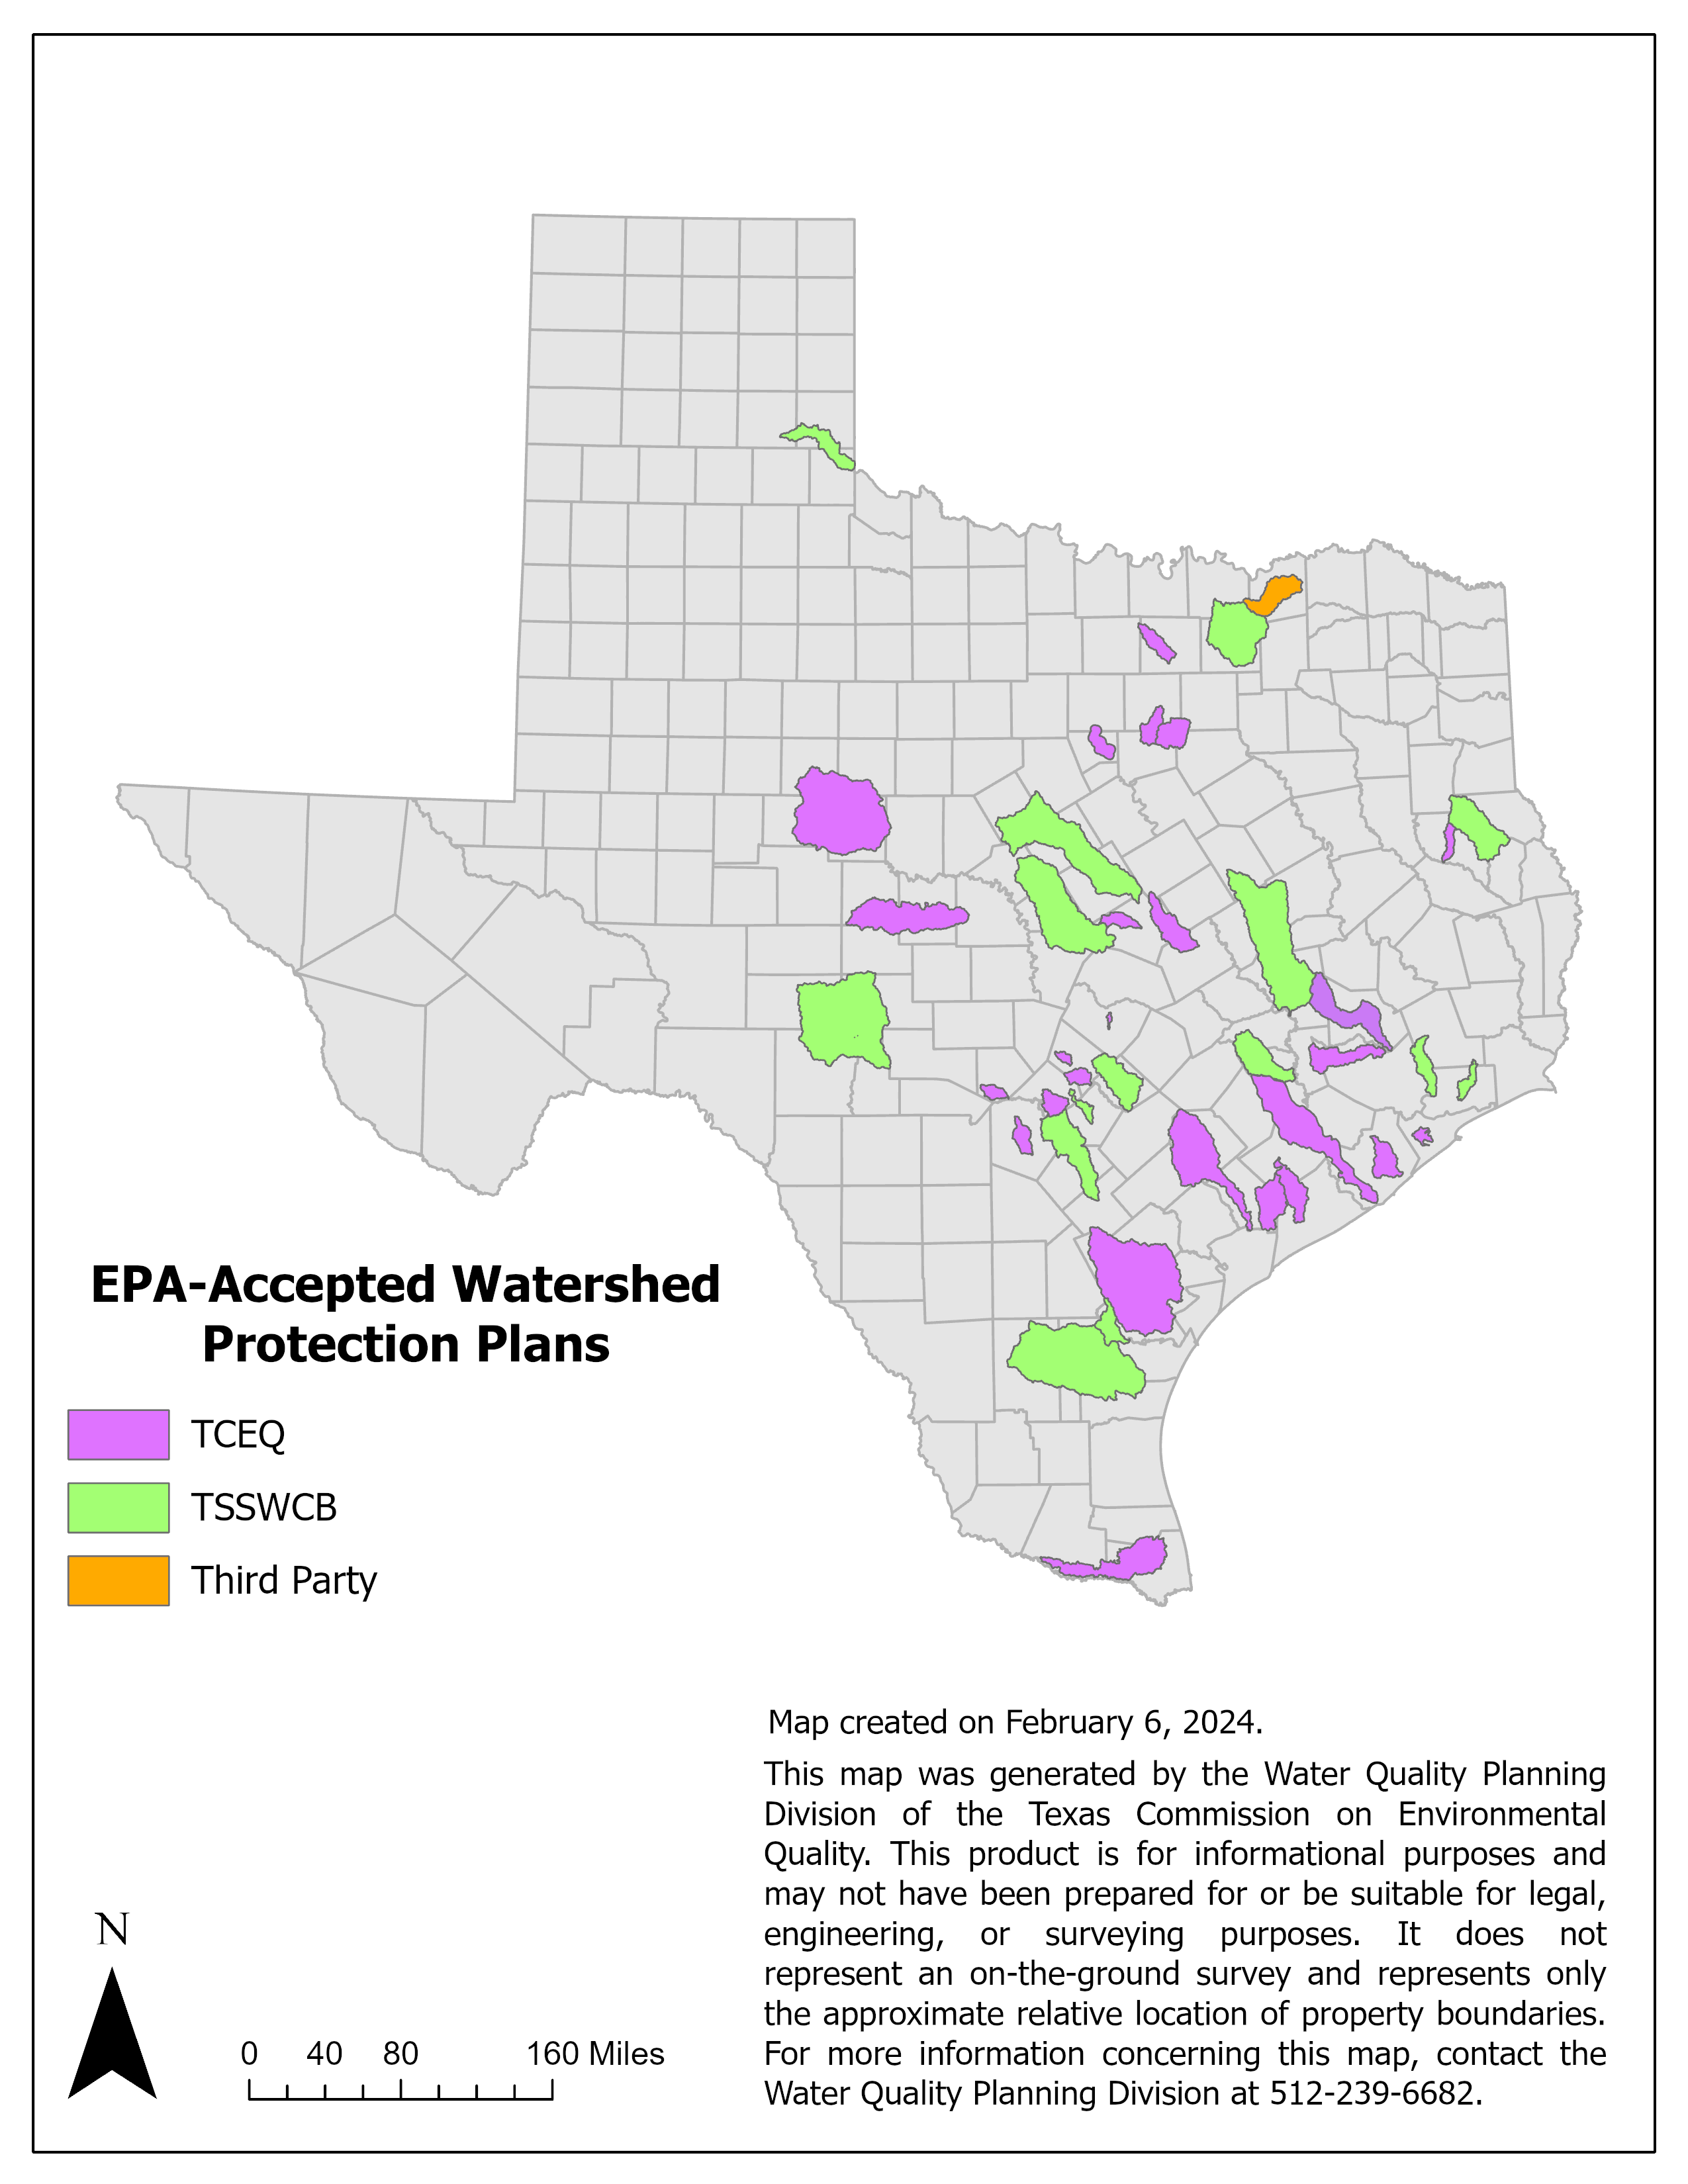 Map of Texas with polygons indicating watersheds that have EPA-accepted watershed protection plans.